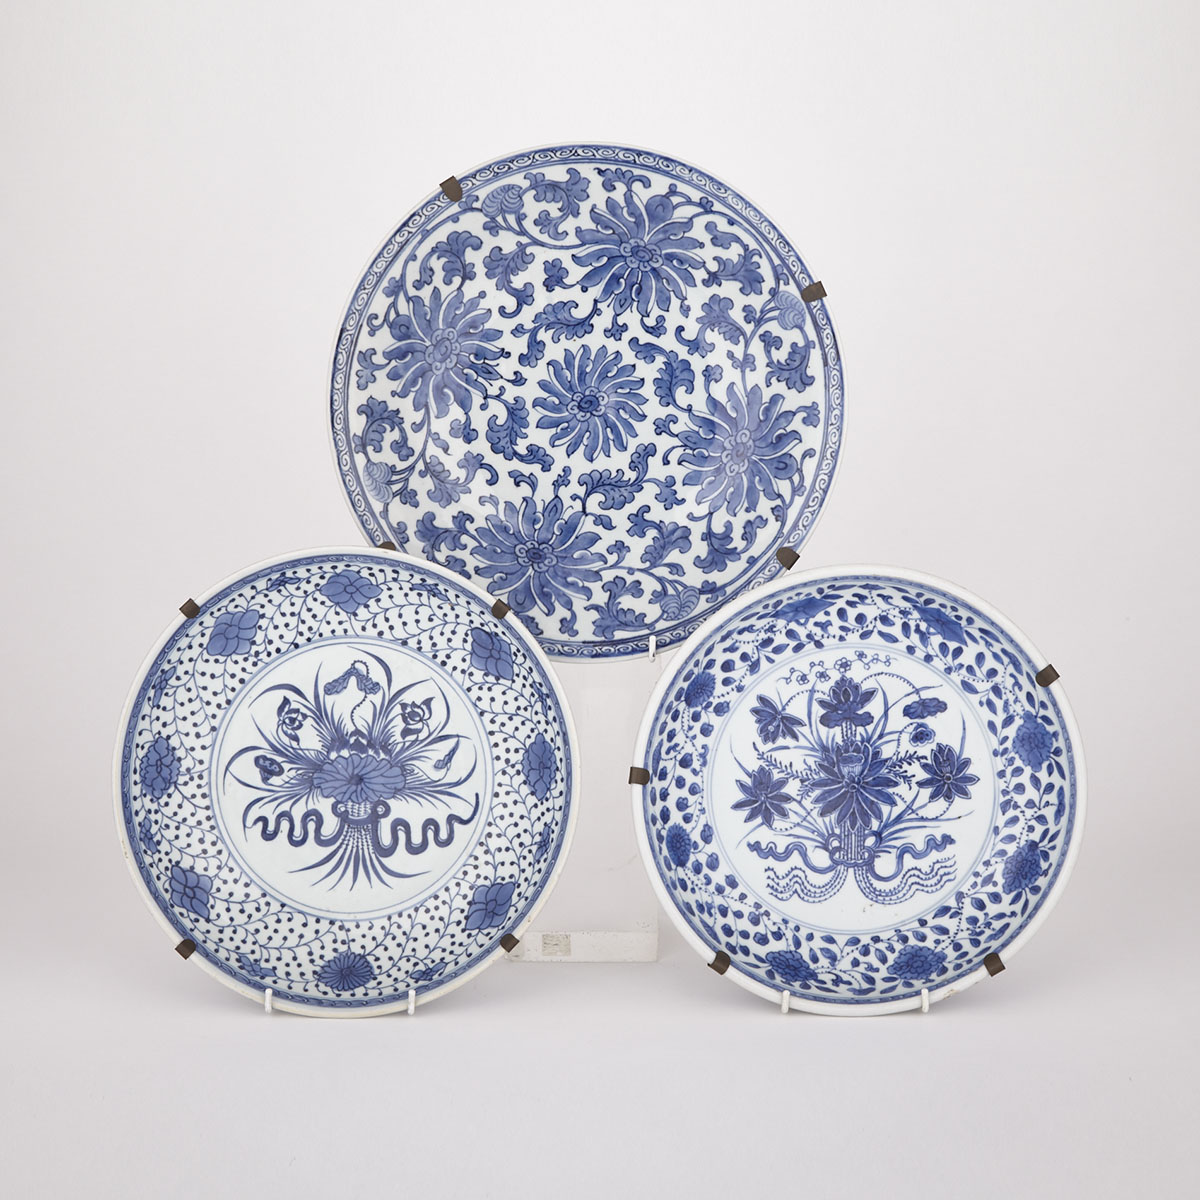 Three Blue and White Dishes, 20th Century